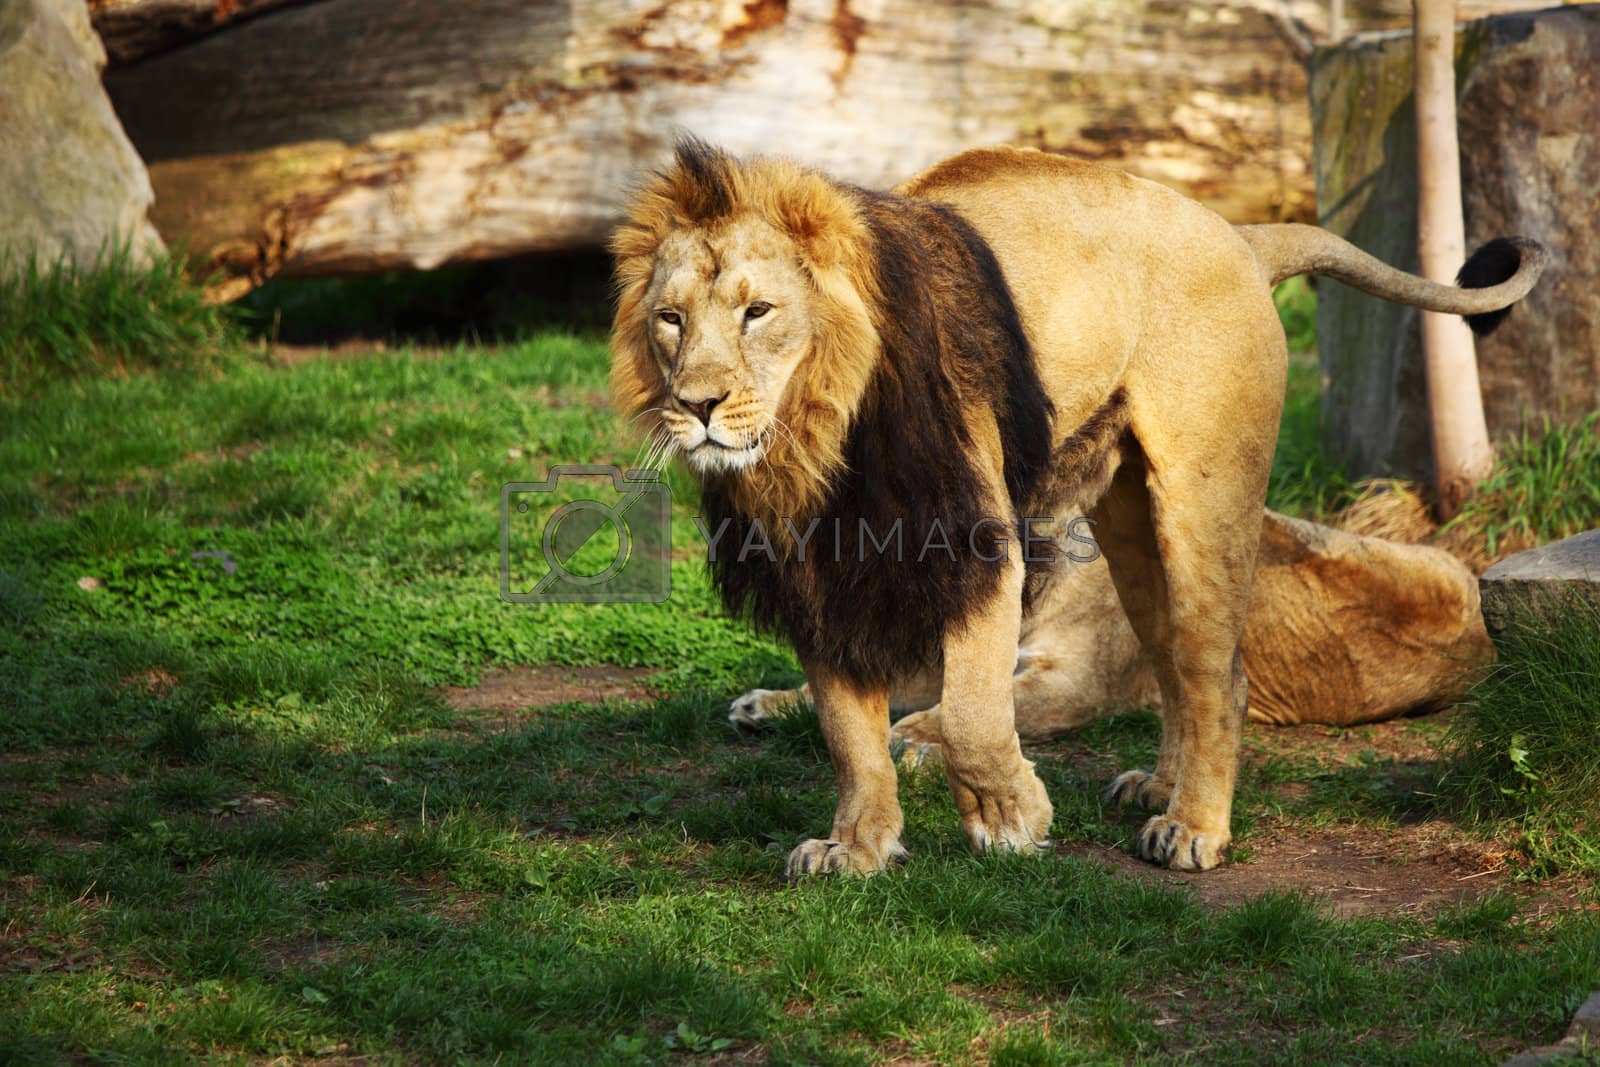 Royalty free image of lion by Yellowj